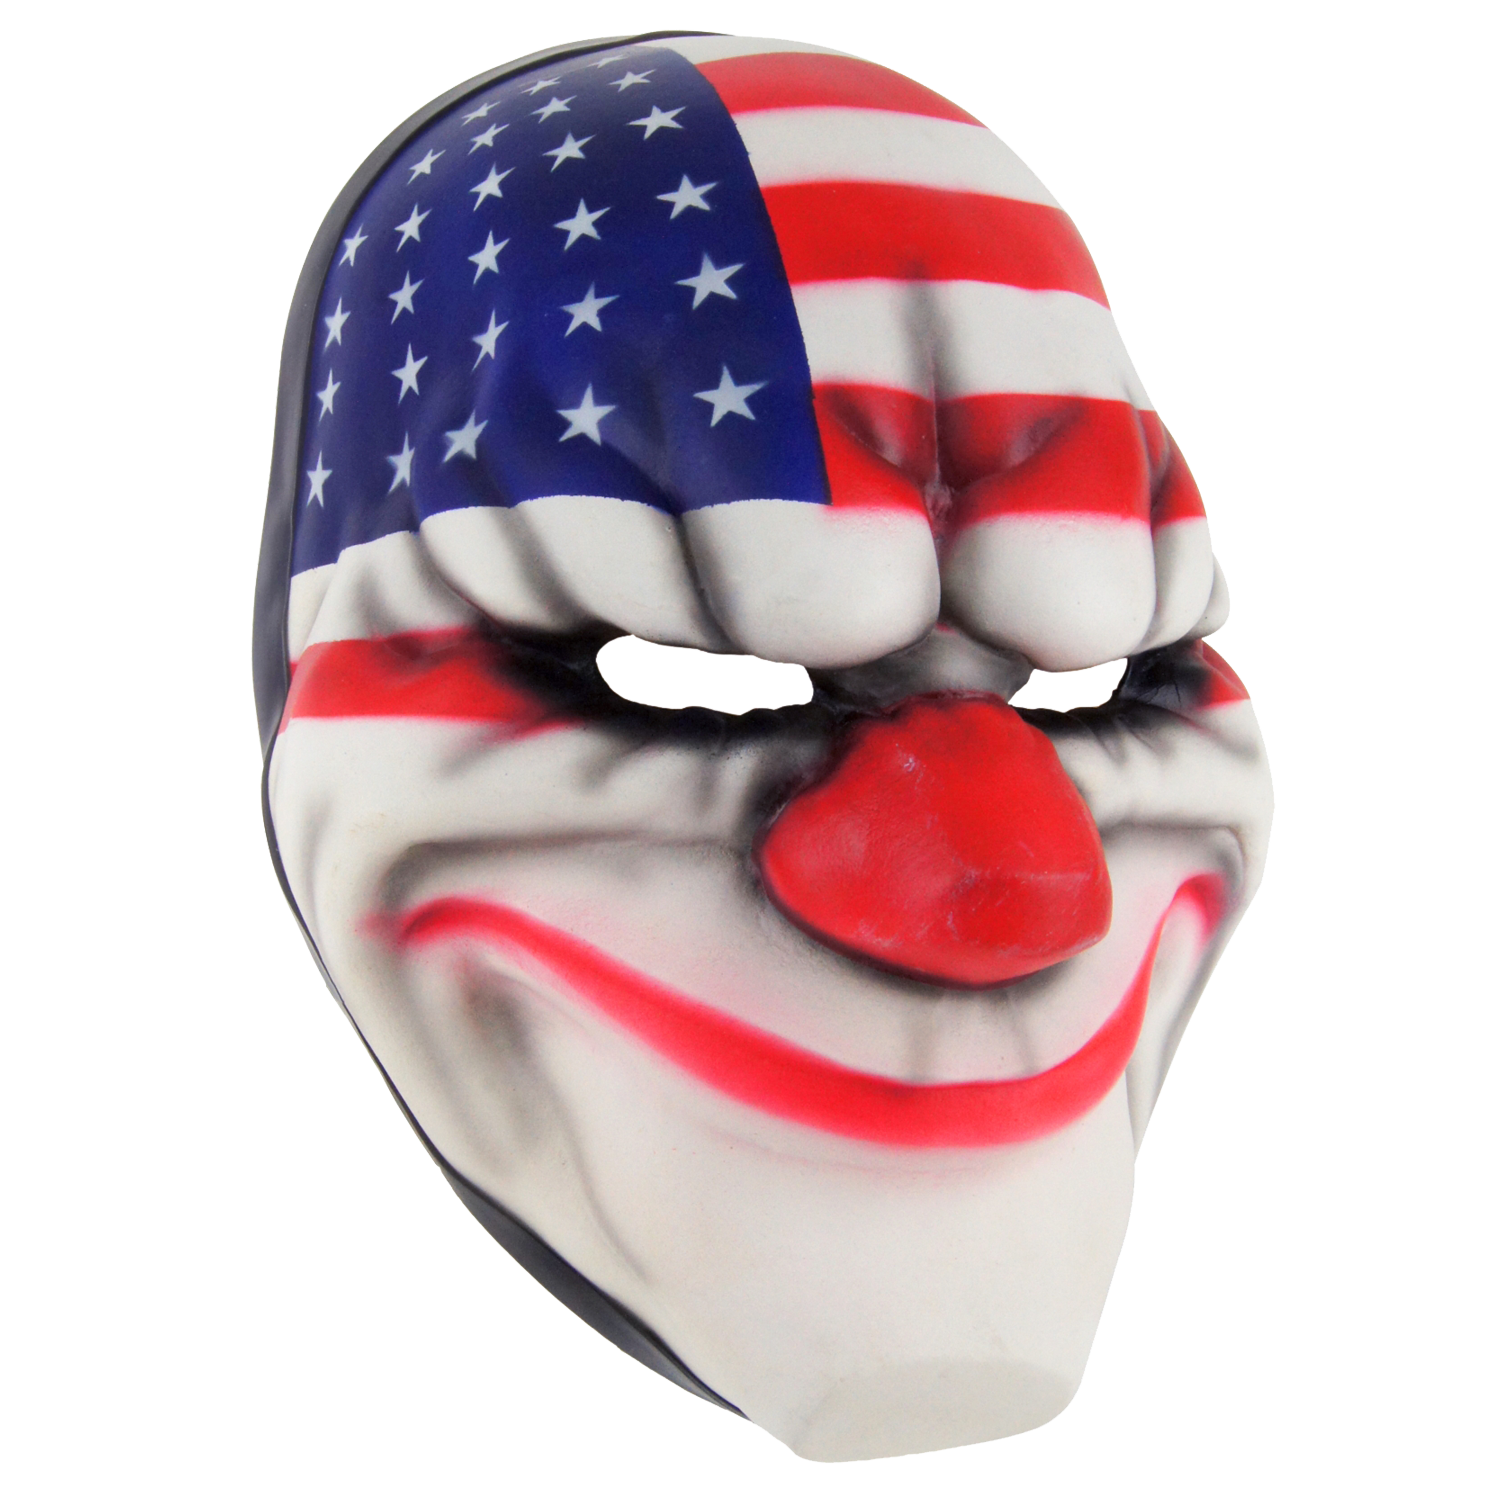 recorder Autonomie Opsplitsen Payday 2 Replica Dallas Mask | The official Payday 2 Merch Store